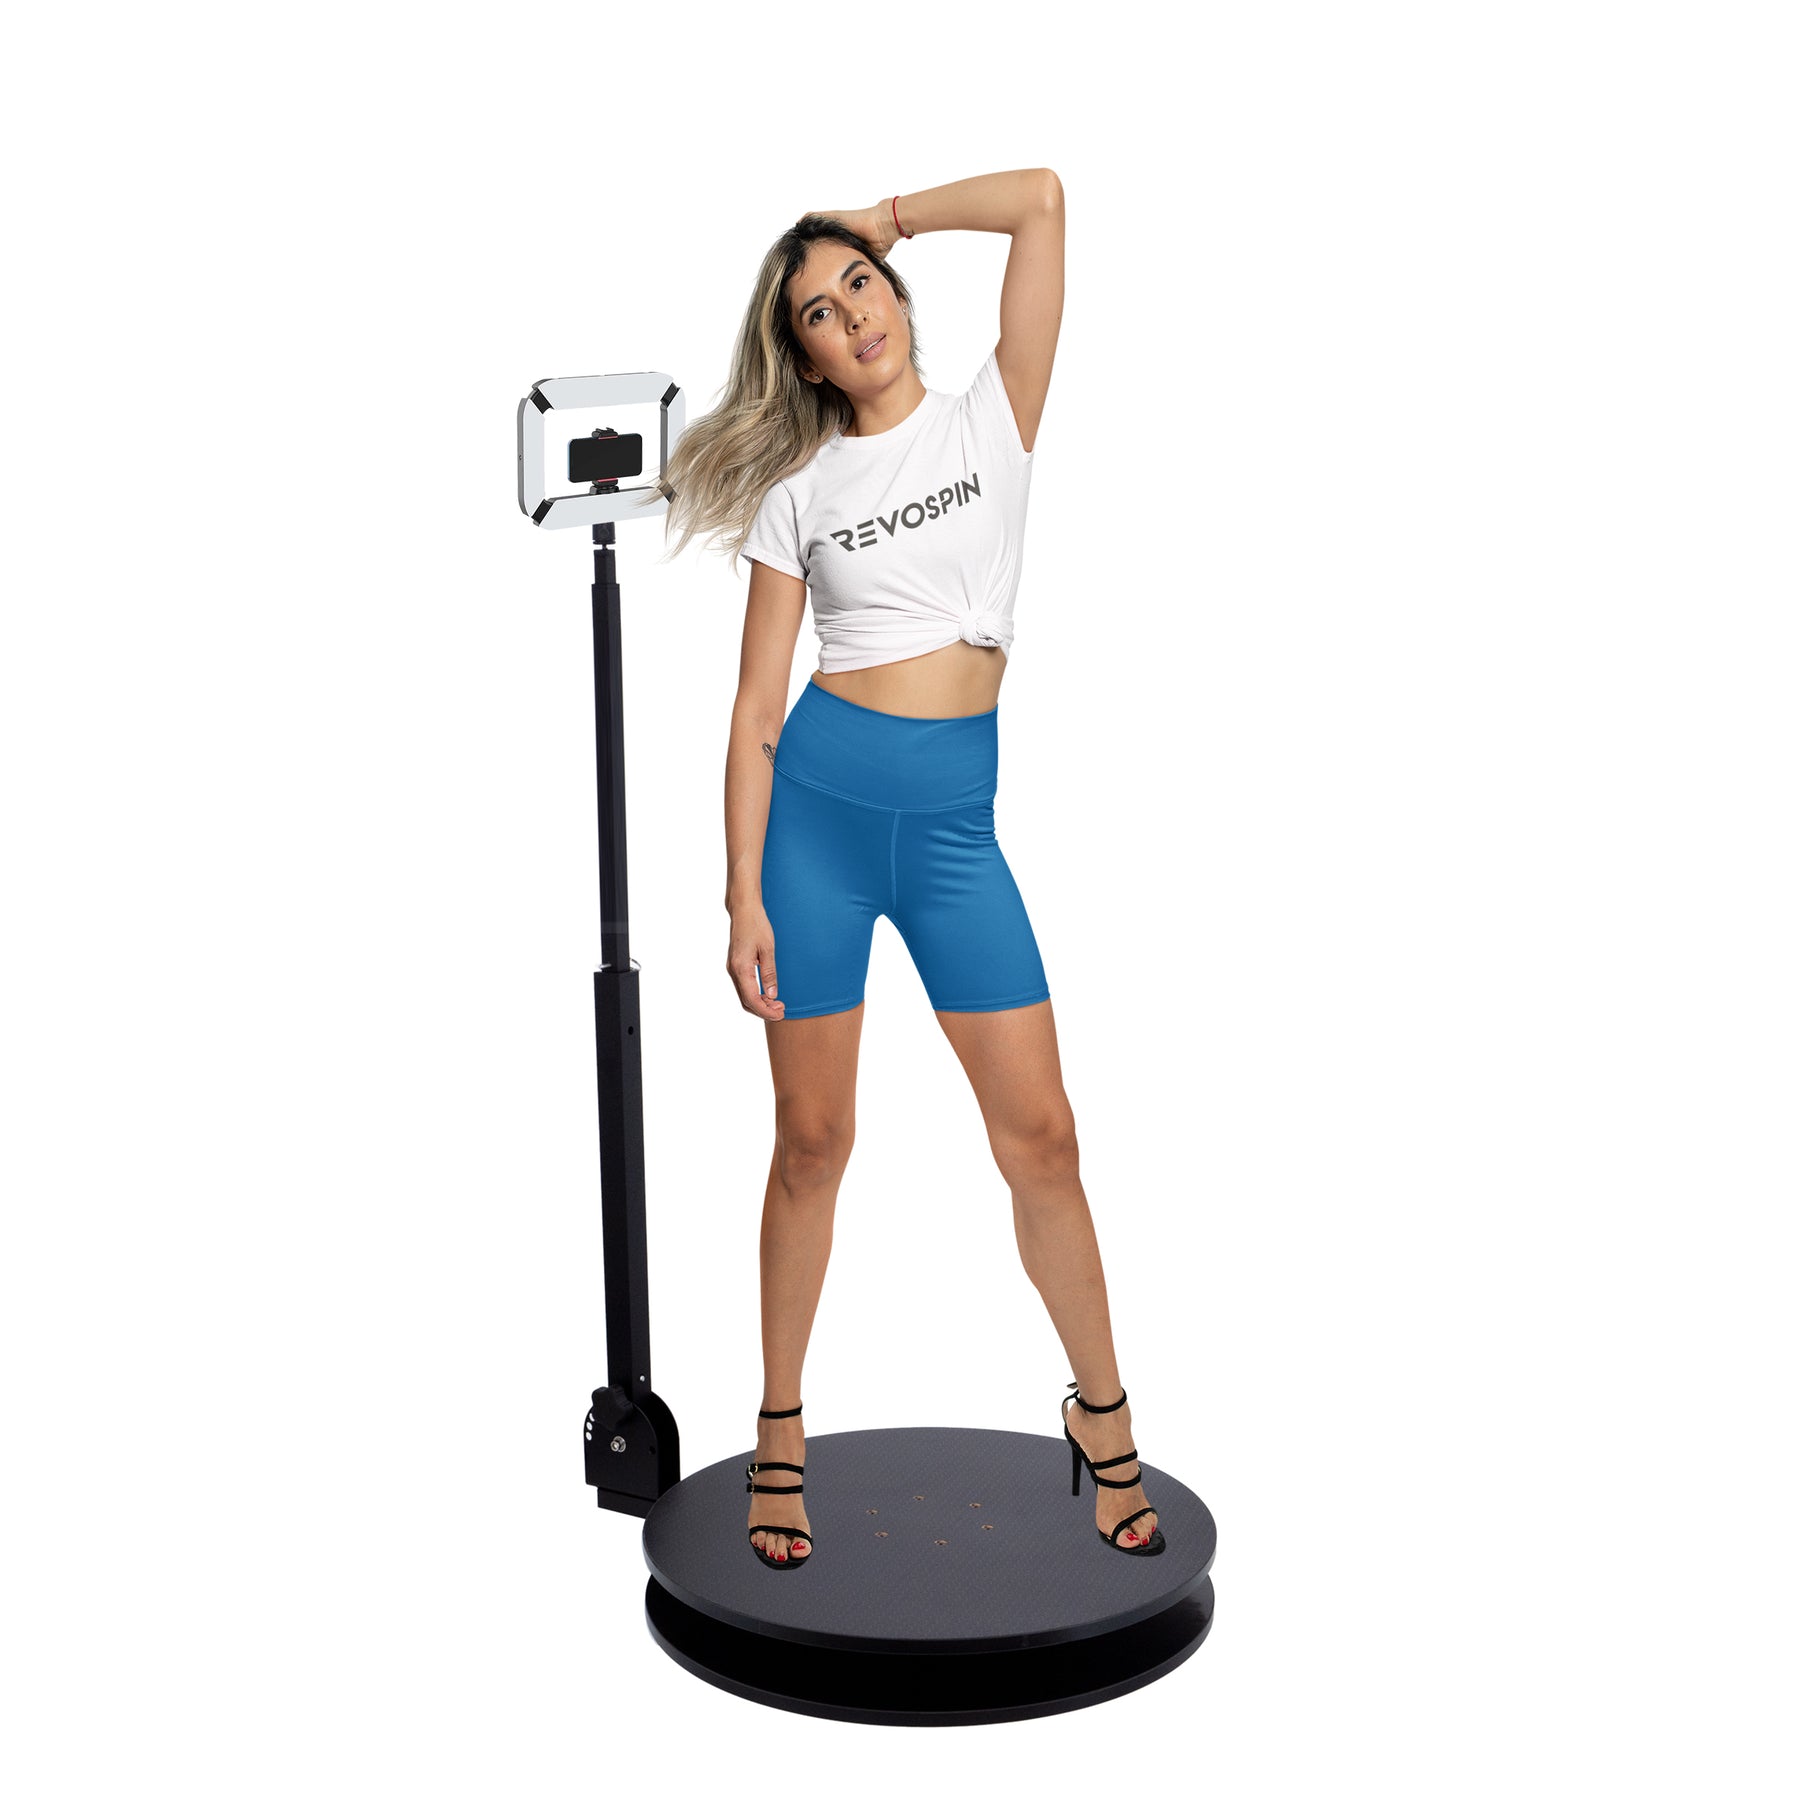 The Best 360 Photo Booths For Sale